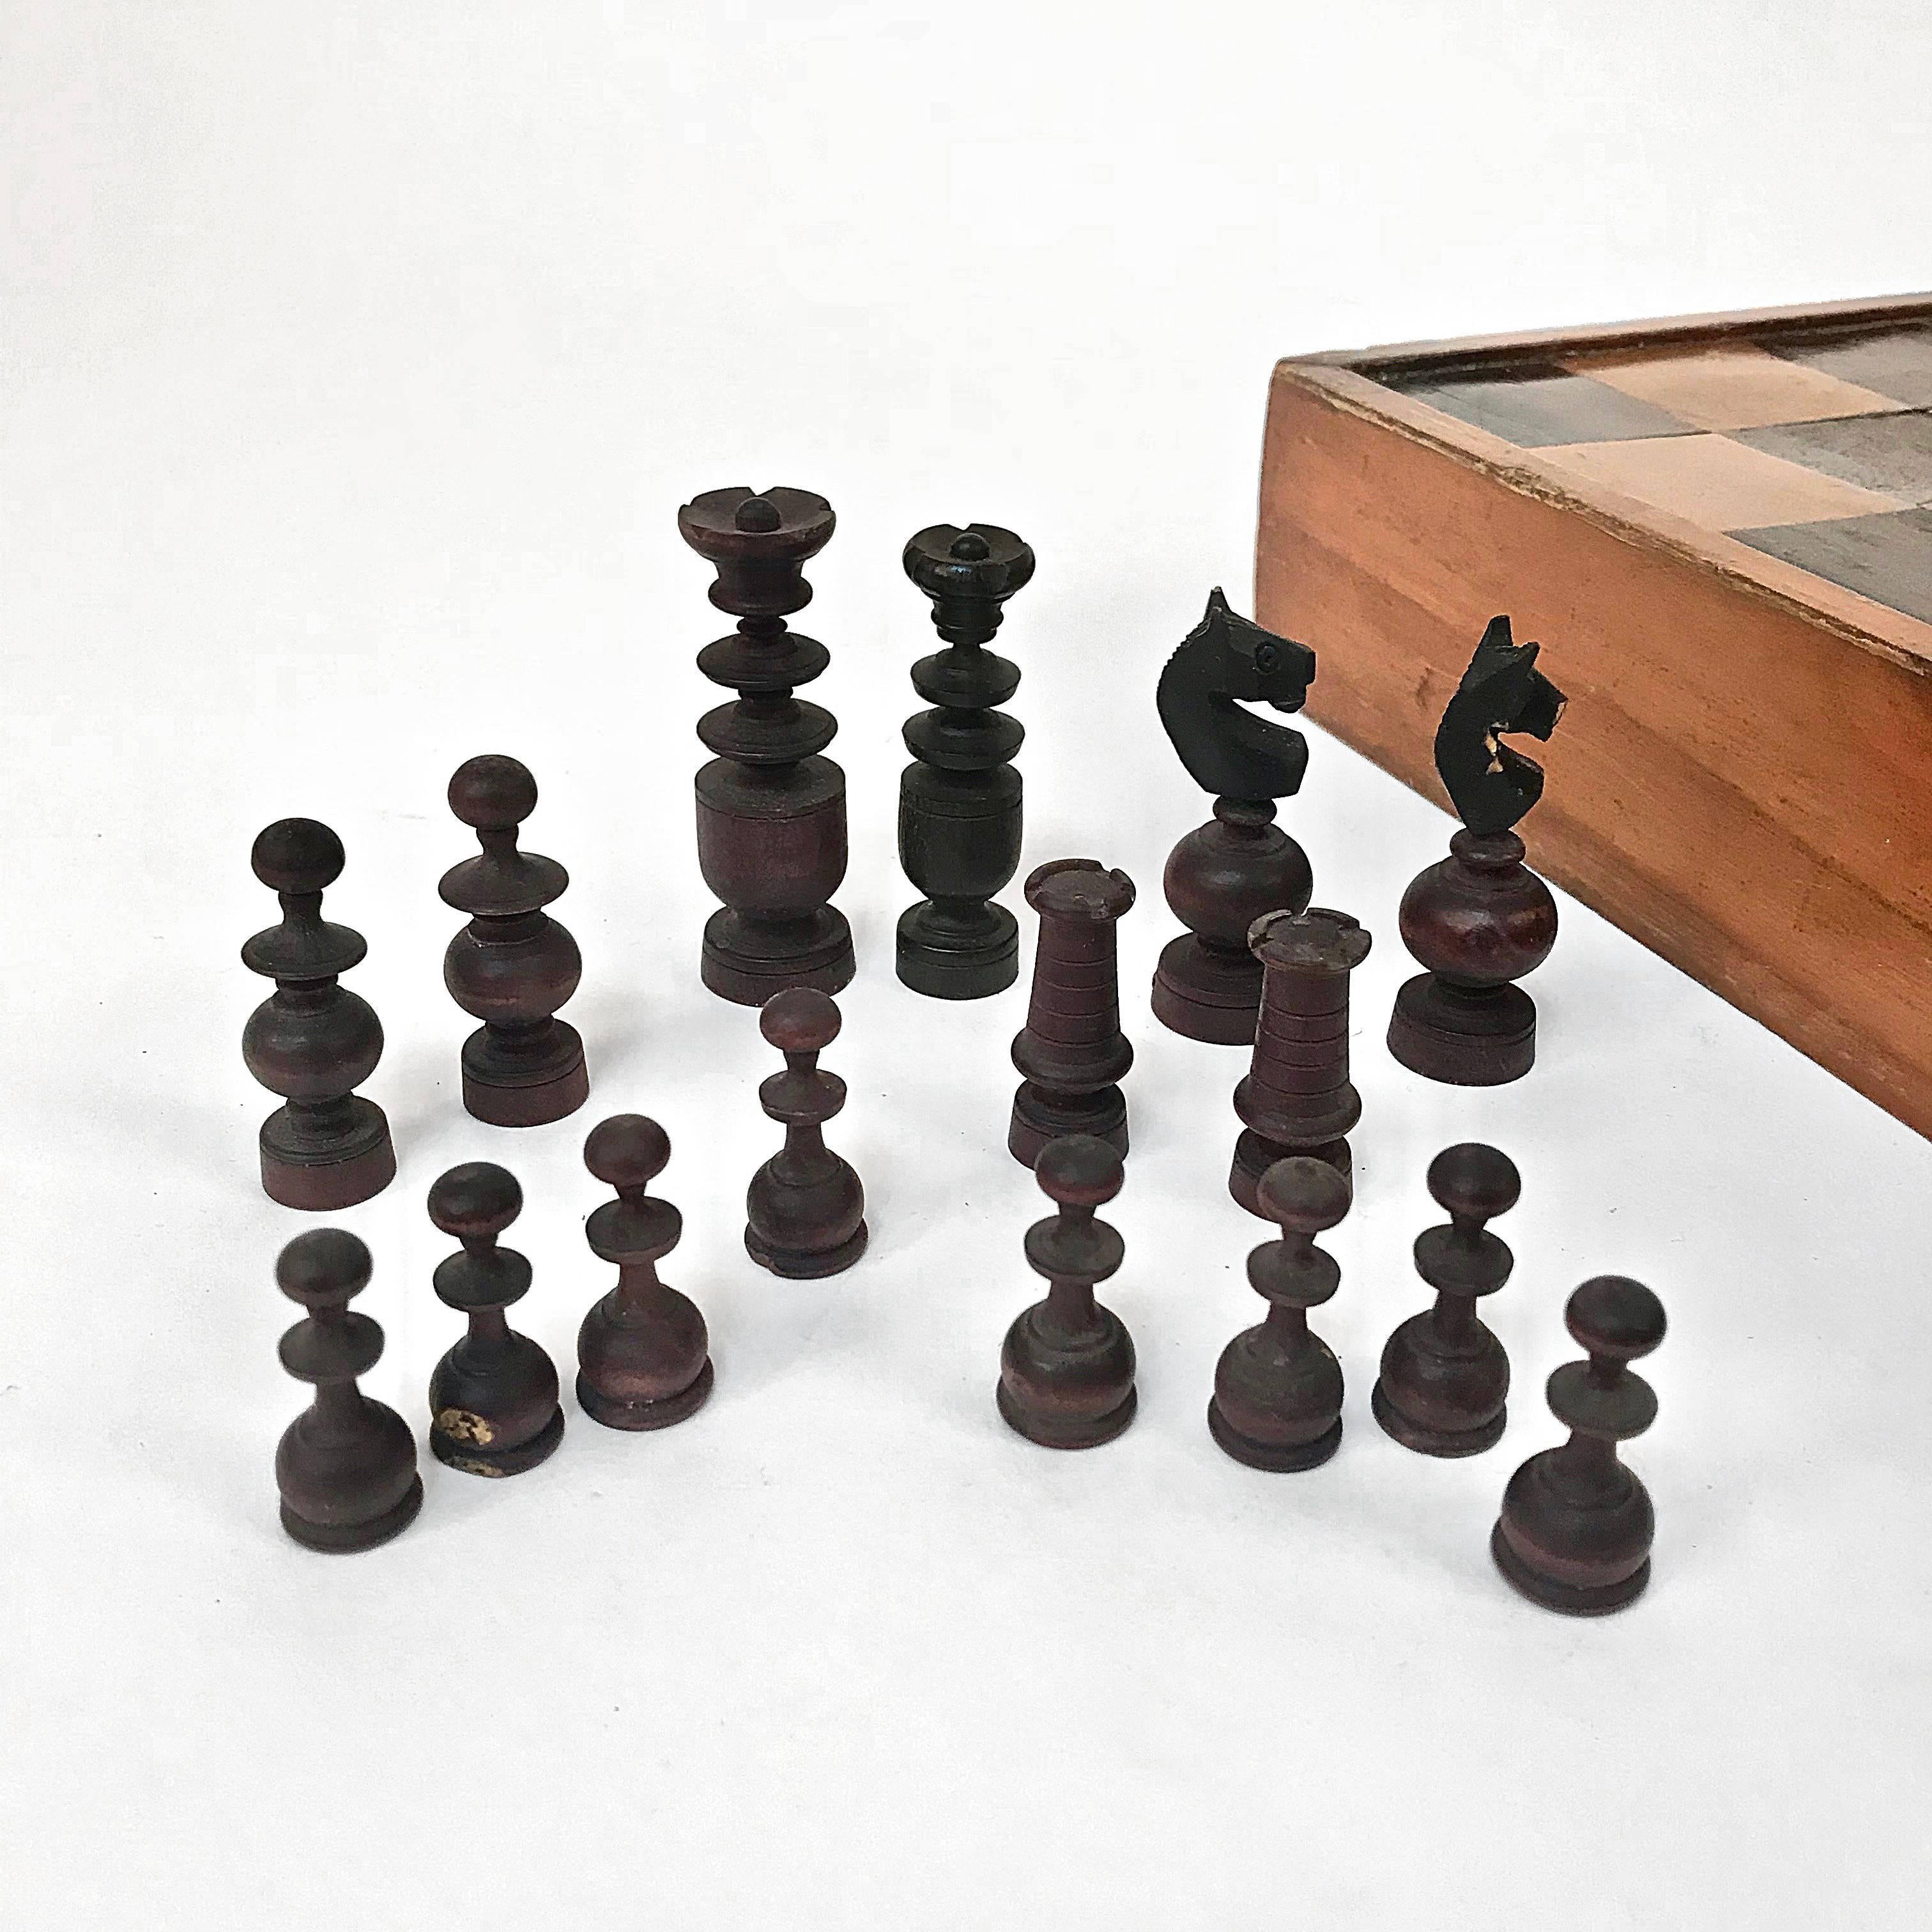 Wood Antique Chessboard Inlaid Inlay Chess or Checker Game 19th Century Checkerboard